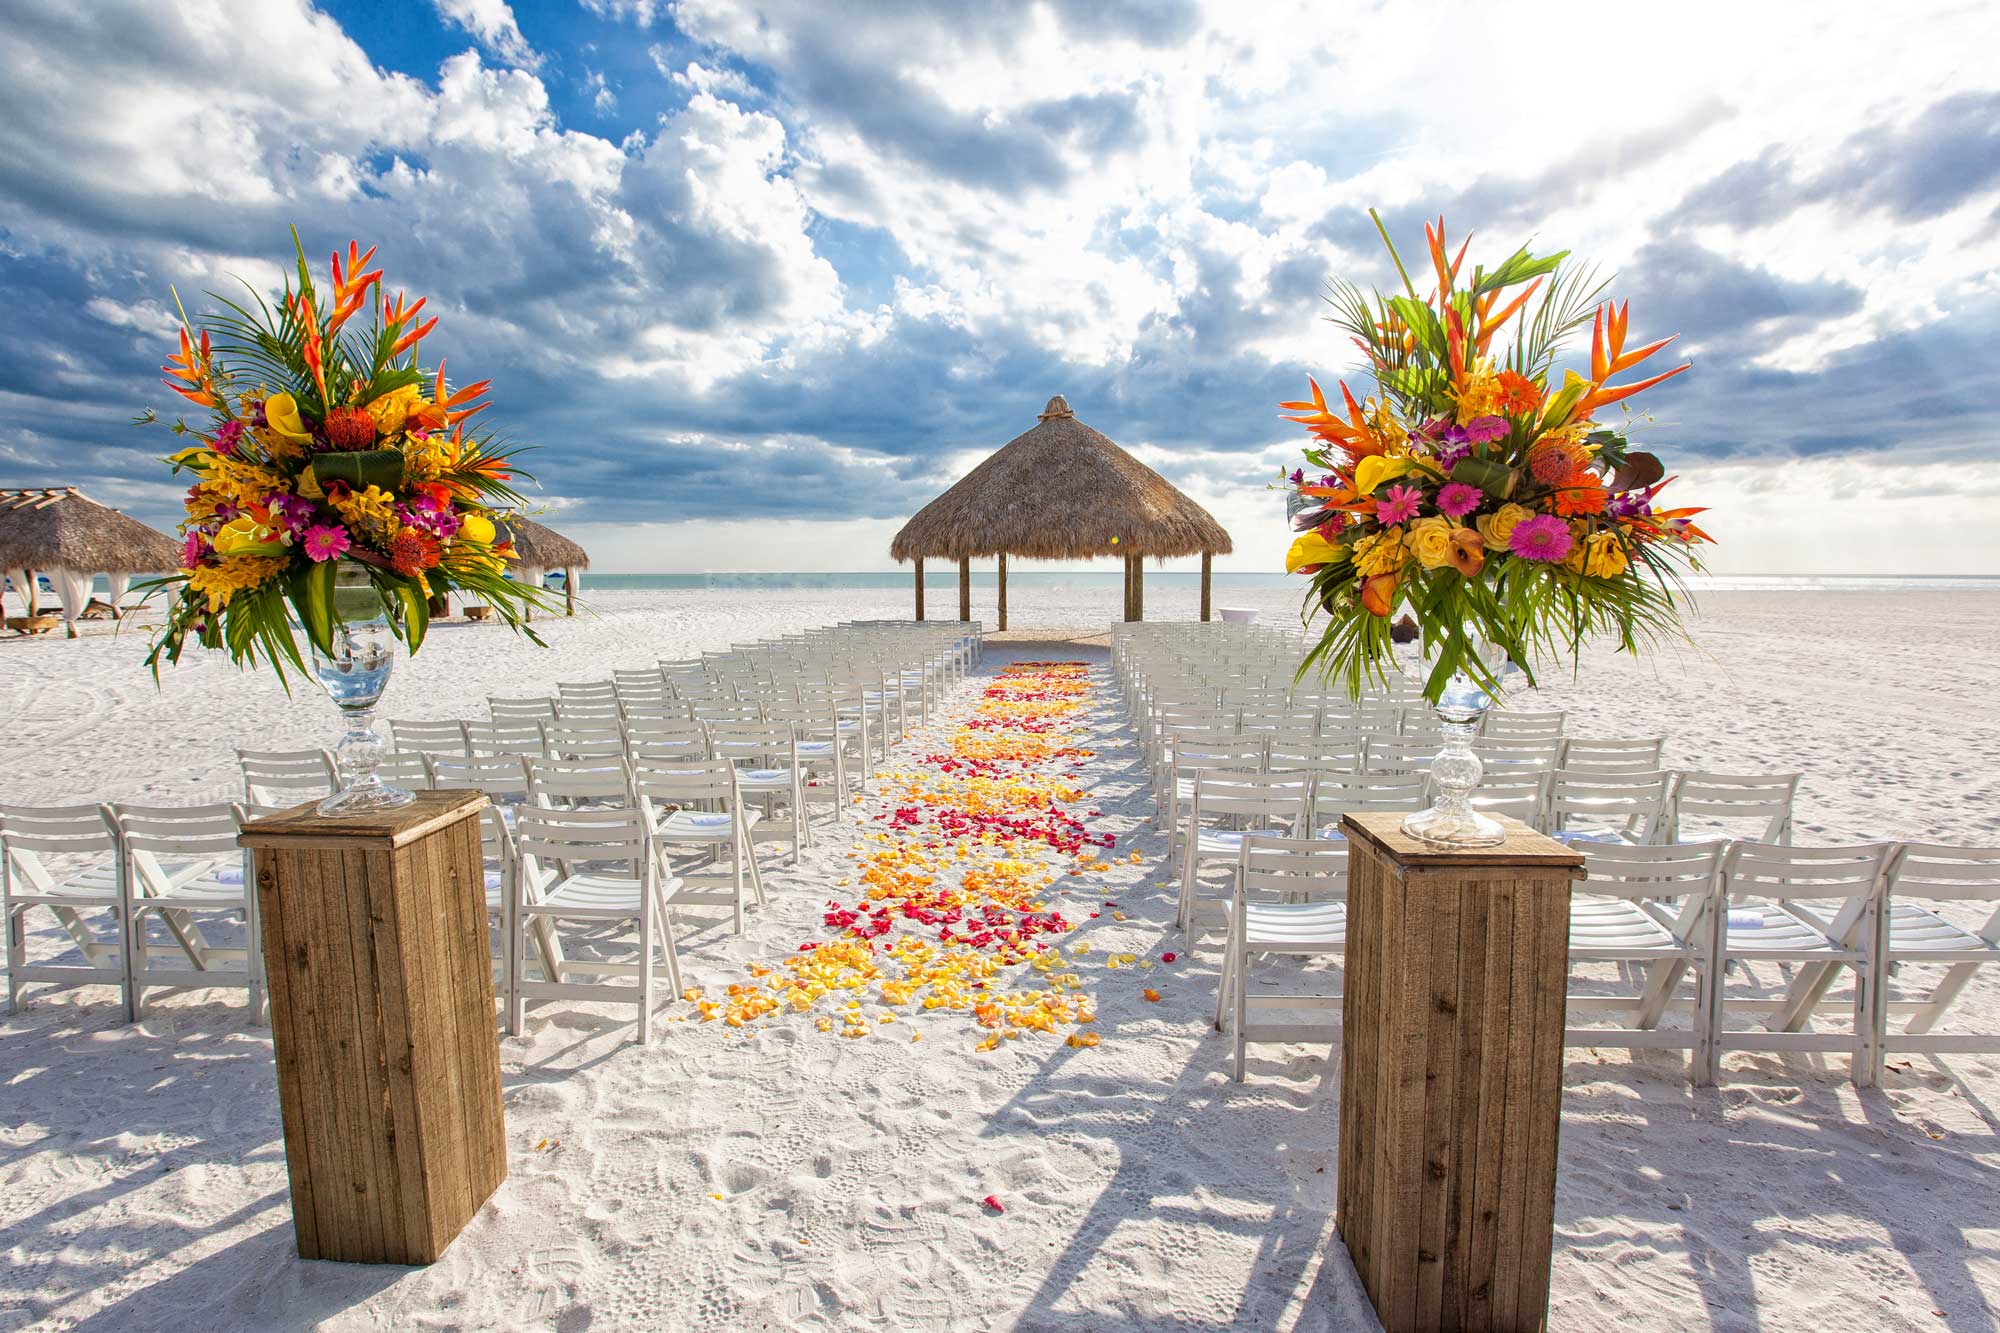 Top Florida Wedding Venues for Florida Destination Weddings | Best Places to Get Married in Florida | Marco Island Marriott Beach Resort